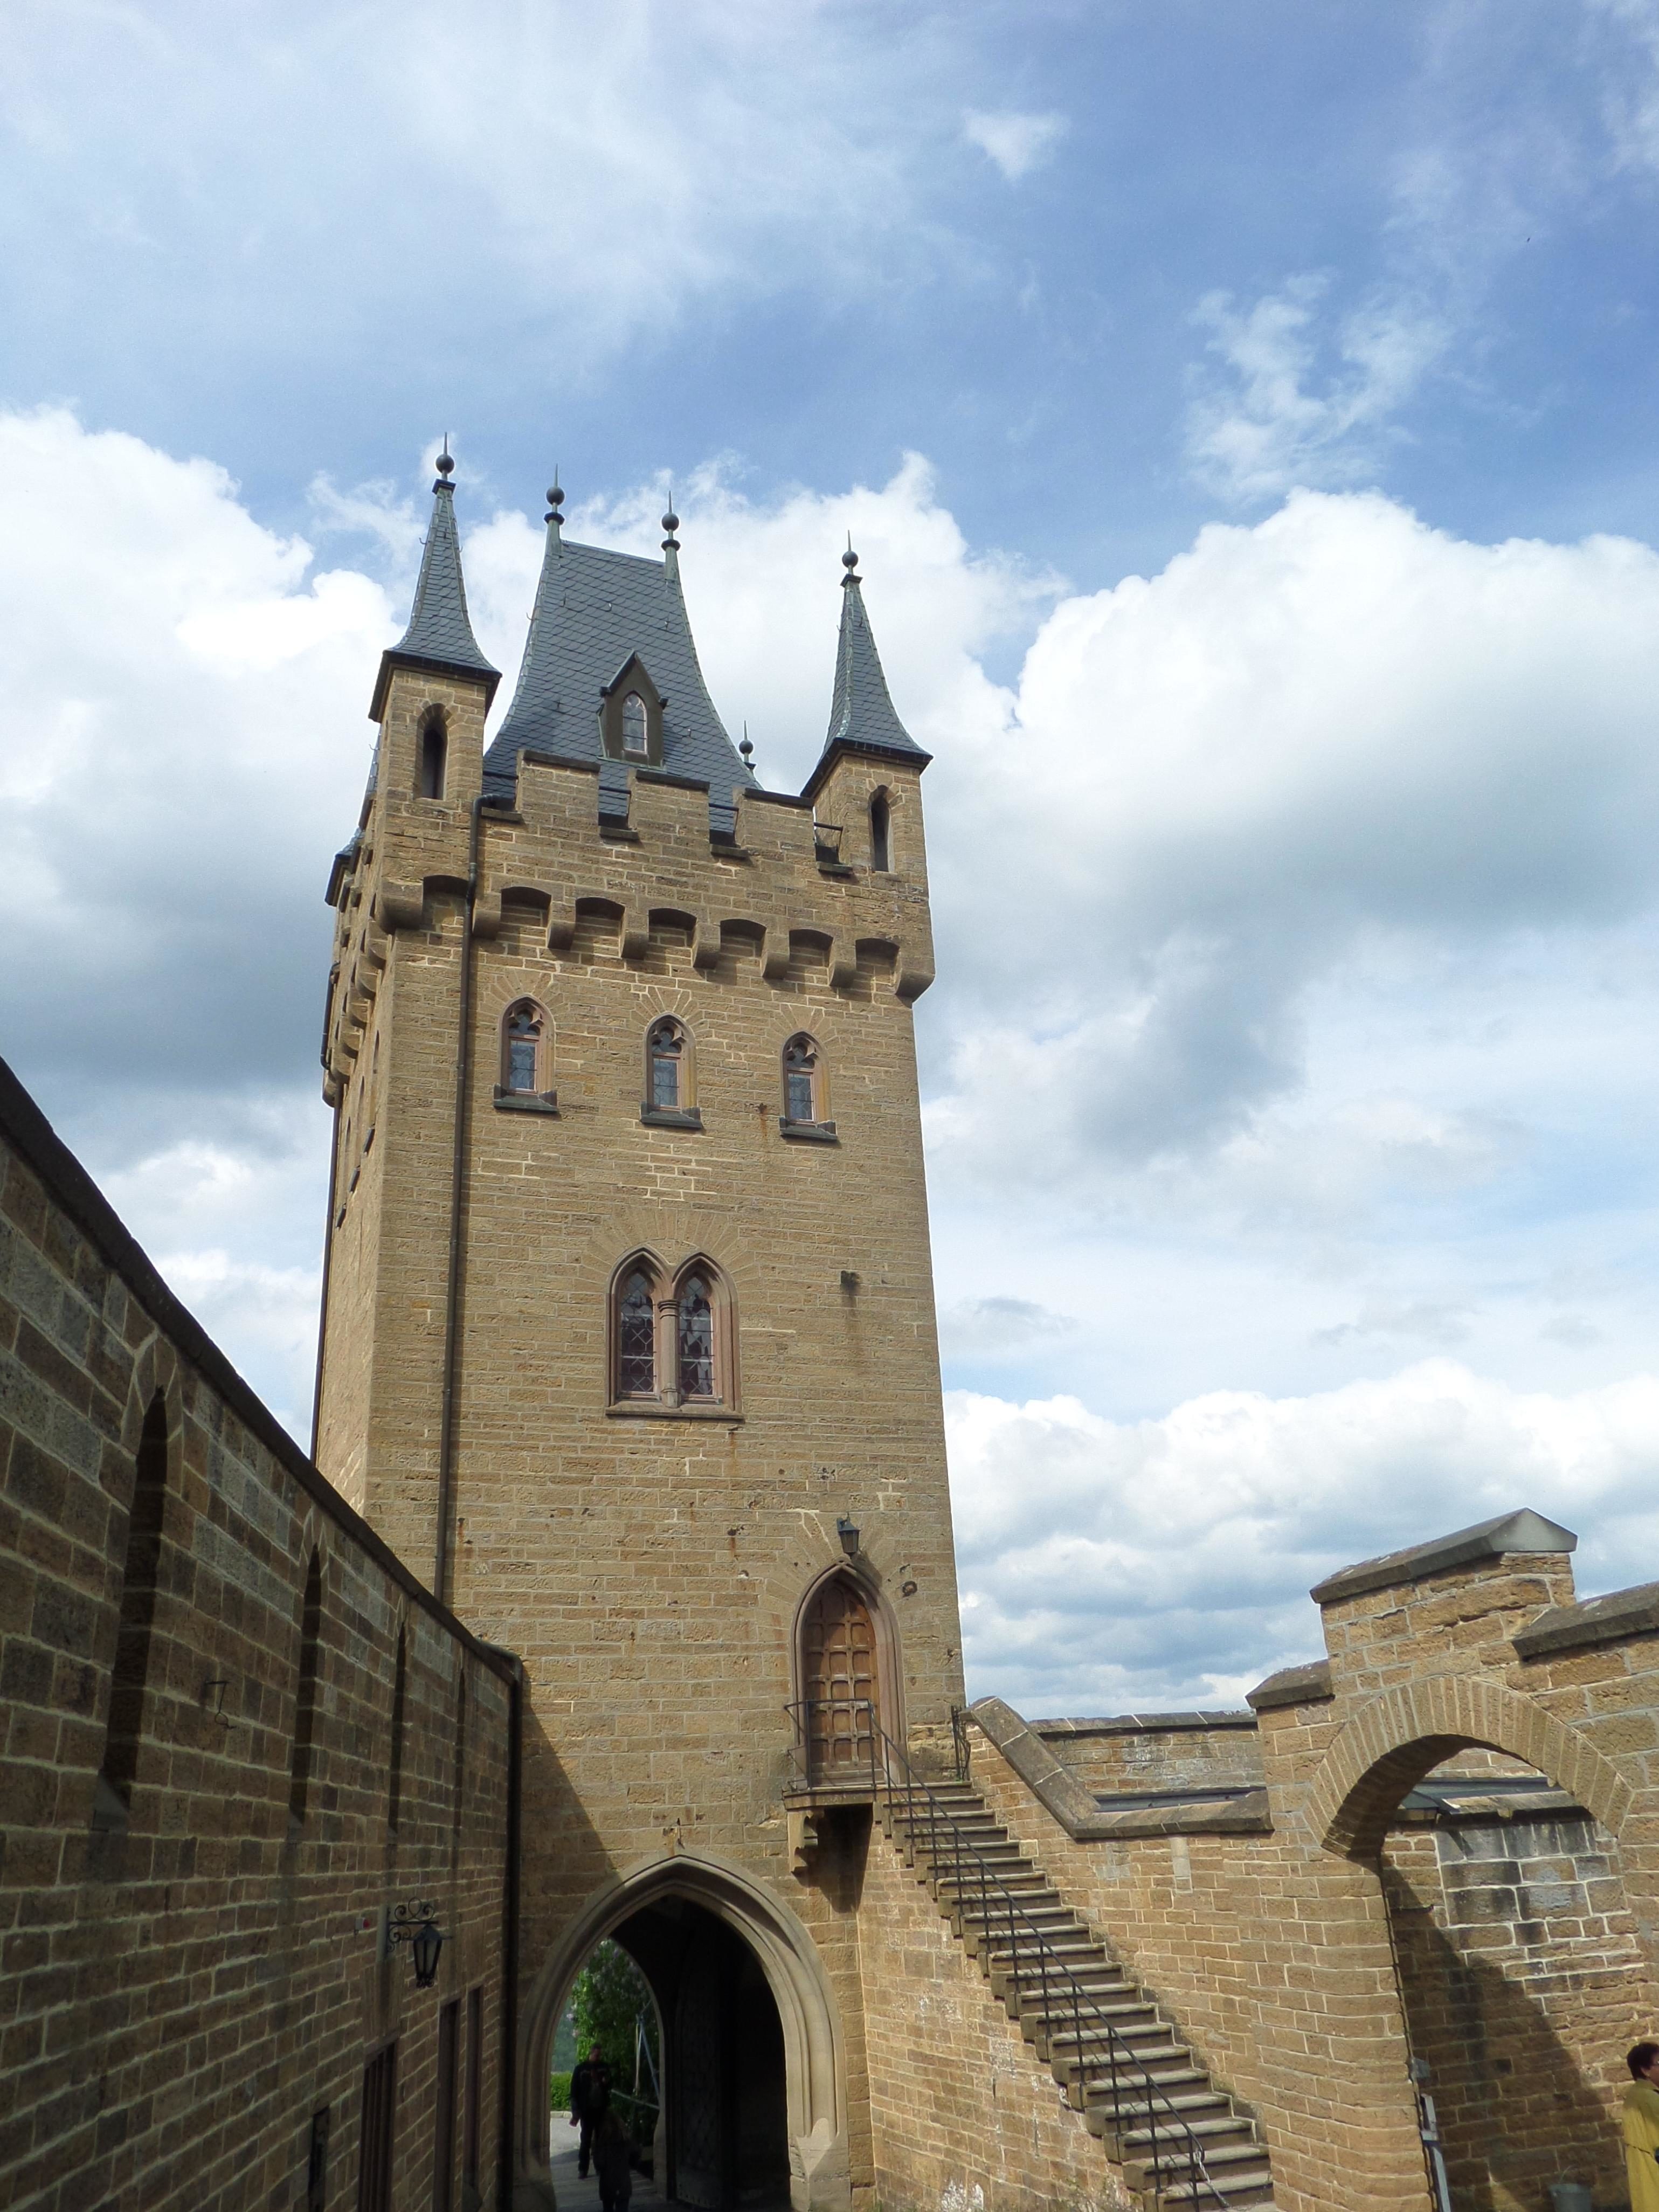 Free picture: architecture, Gothic, old, castle, tower, monument ...